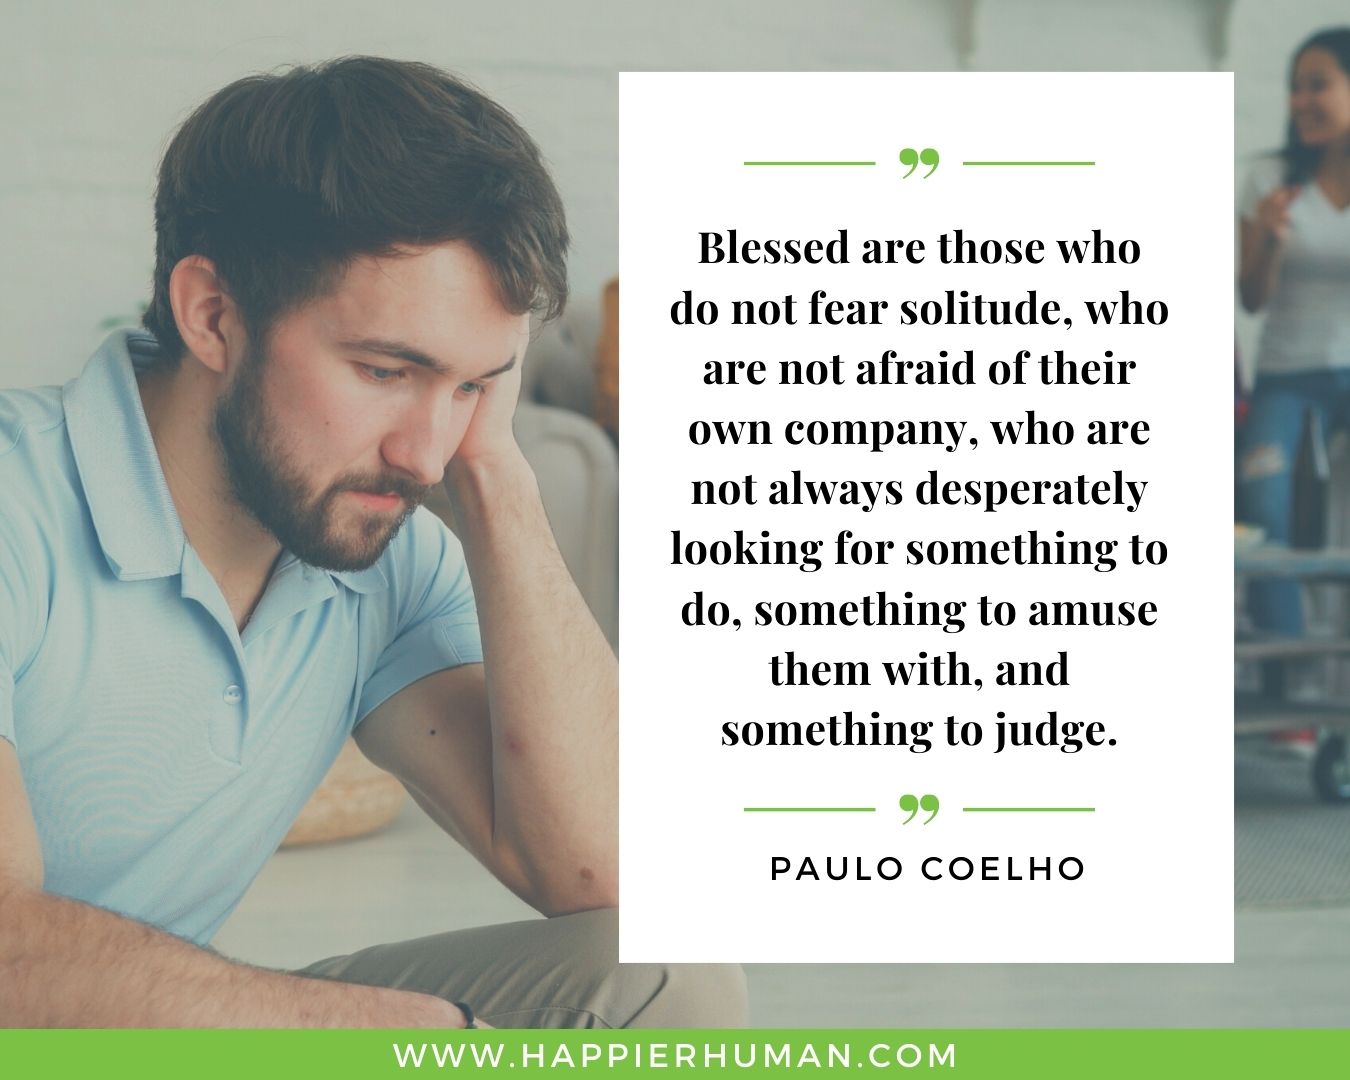 Introvert Quotes - “Blessed are those who do not fear solitude, who are not afraid of their own company, who are not always desperately looking for something to do, something to amuse them with, and something to judge.” – Paulo Coelho